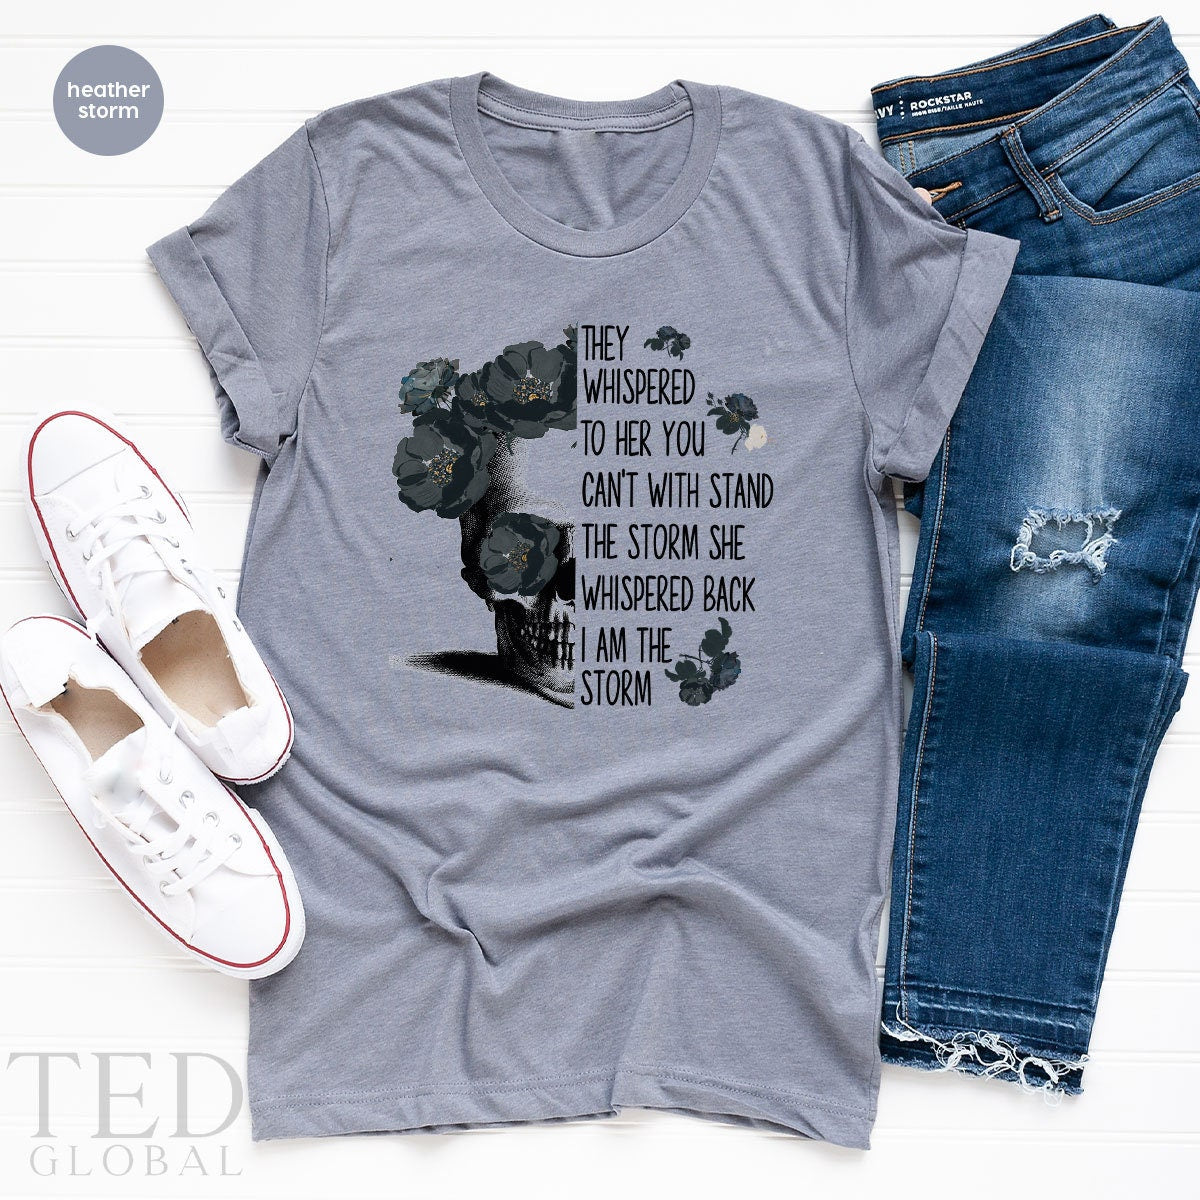 Cute Storm Shirt, Skull Woman Say Shirt, Be The Storm T Shirt, Whispered Shirt, Inspirational Tee, Strong Woman T-Shirt, Gift For Feminist - Fastdeliverytees.com